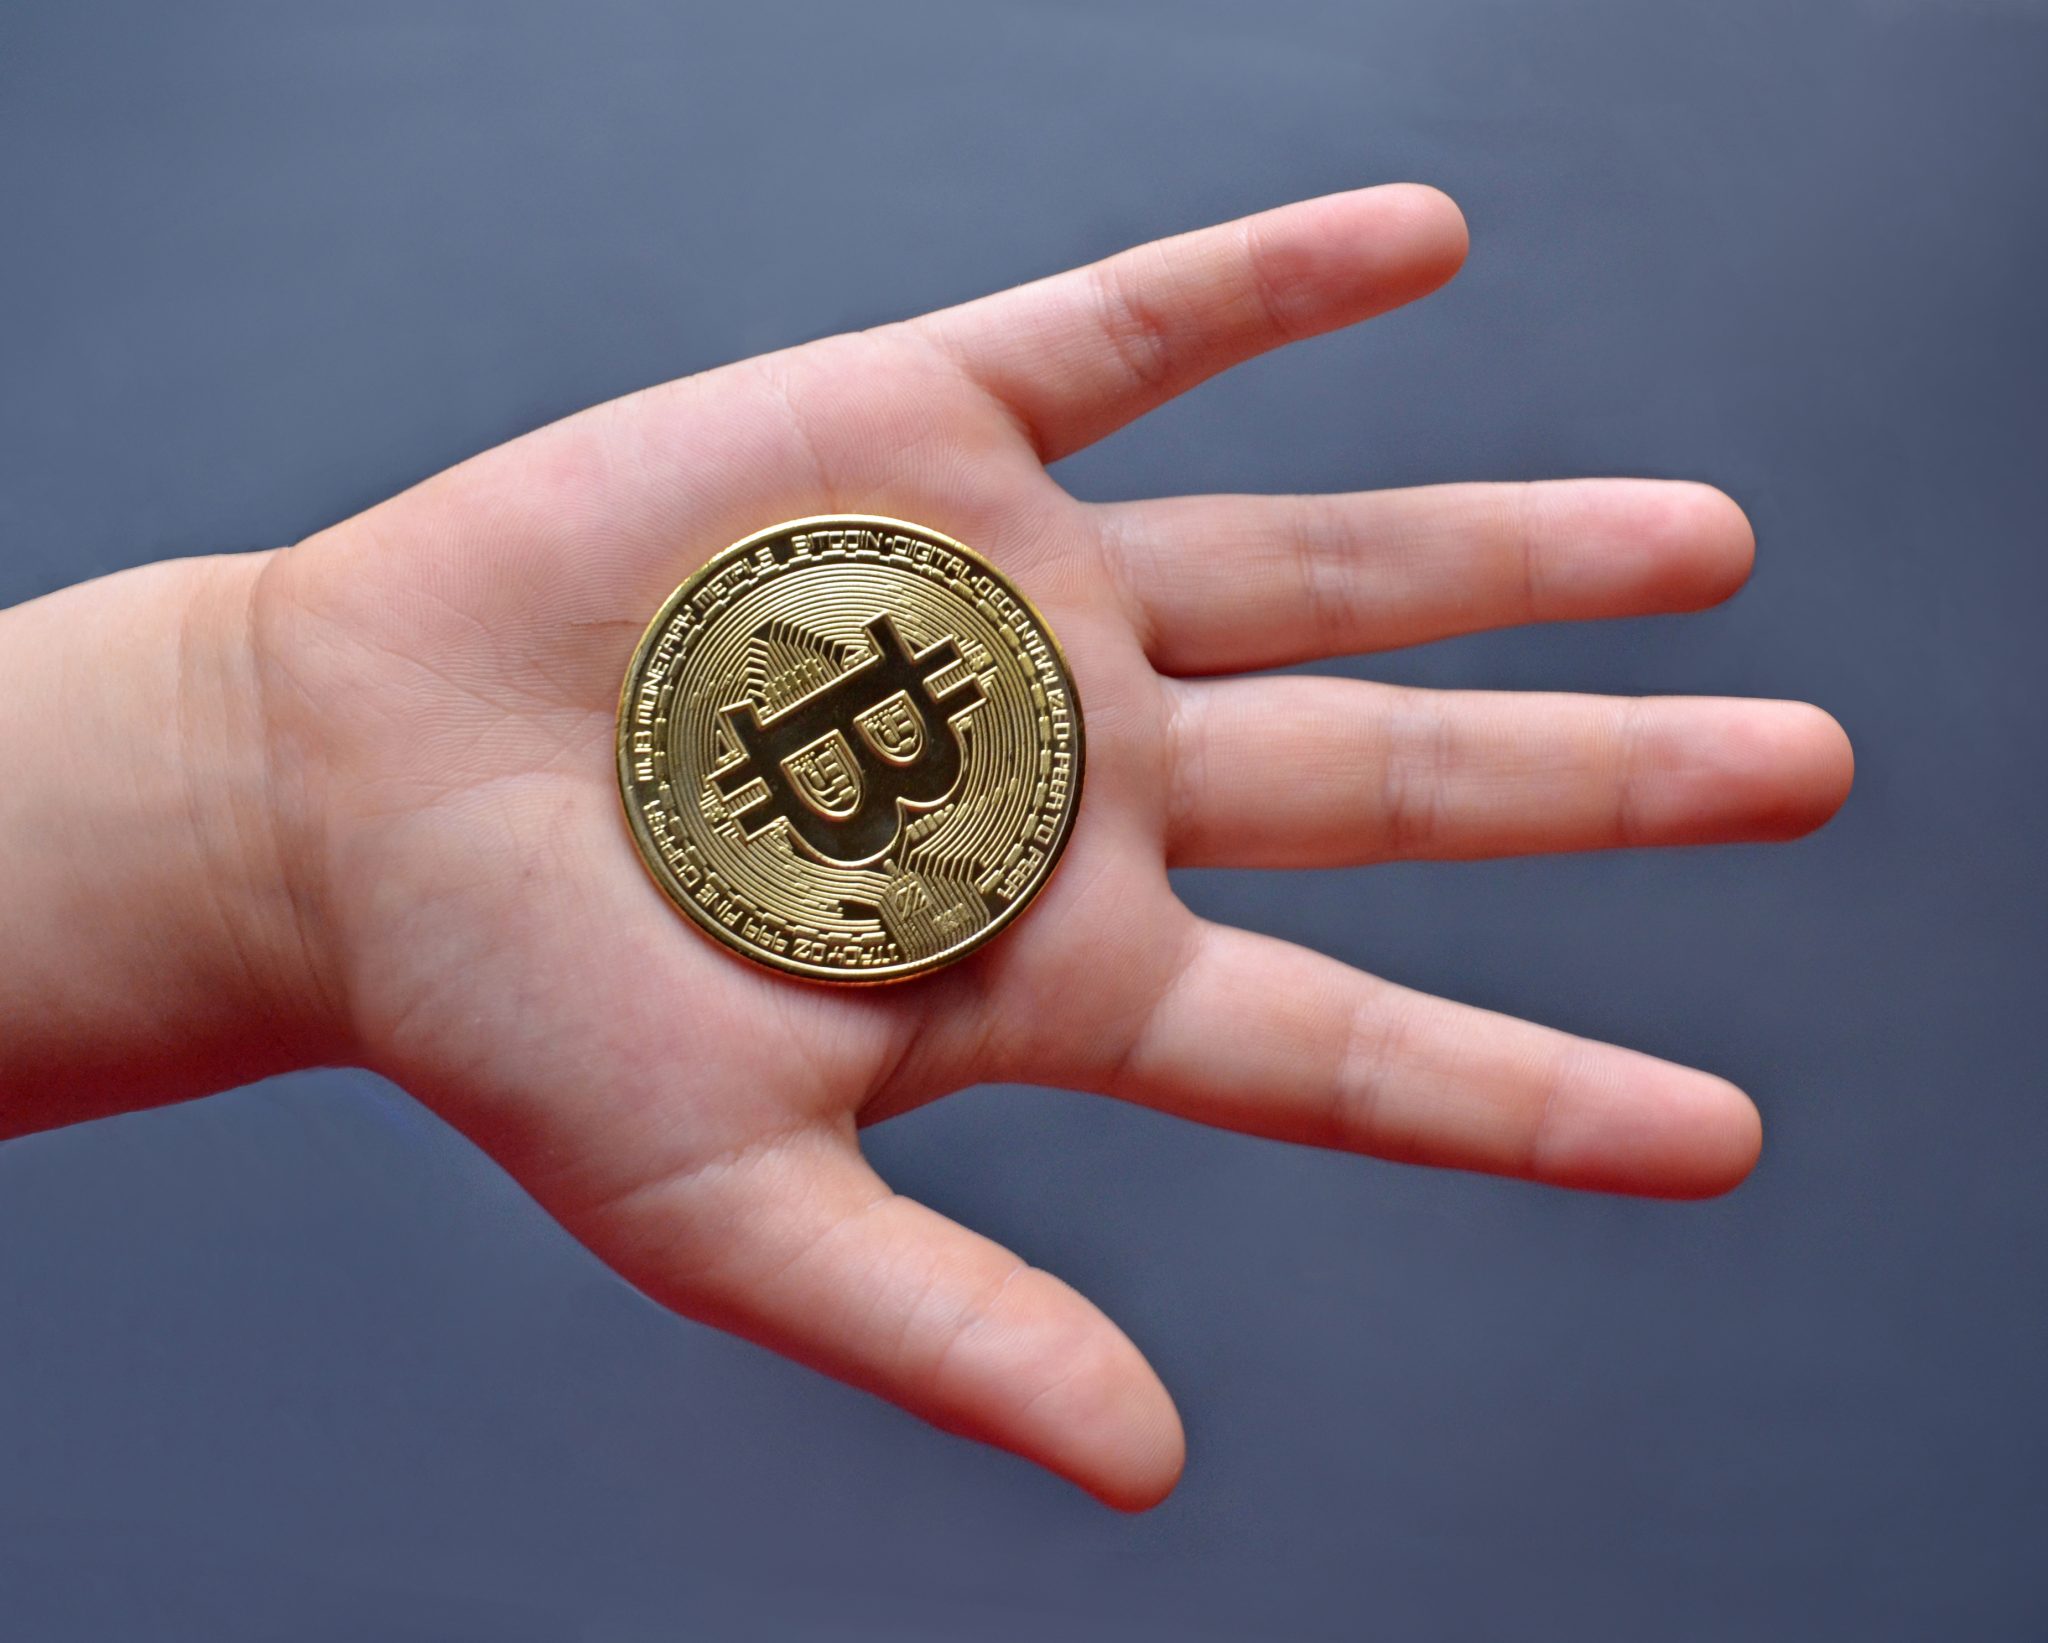 a child's hand holding bitcoin cryptocurrency